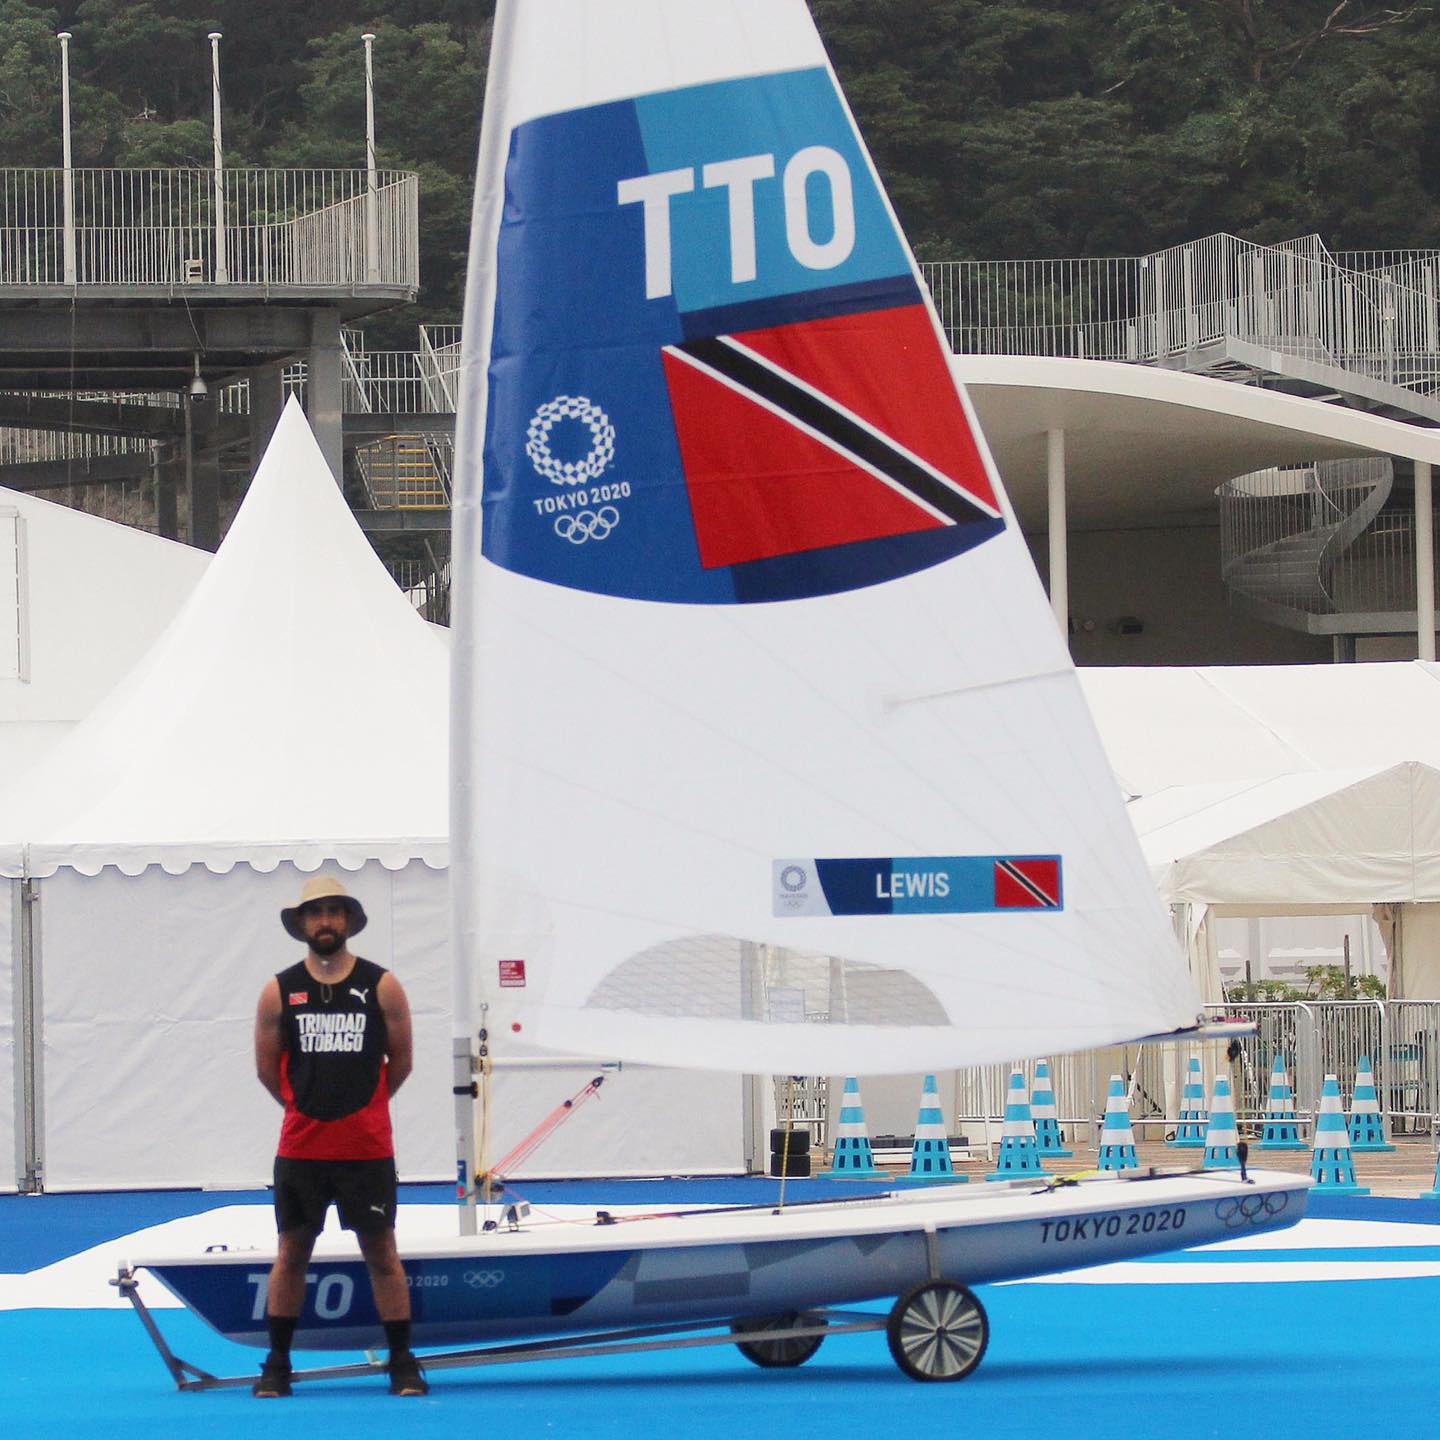 Trinidad and Tobago sailor Andrew Lewis has unveiled his new boat for the Tokyo Olympics. (Photo credit - Andrew Lewis Sailing Facebook page)